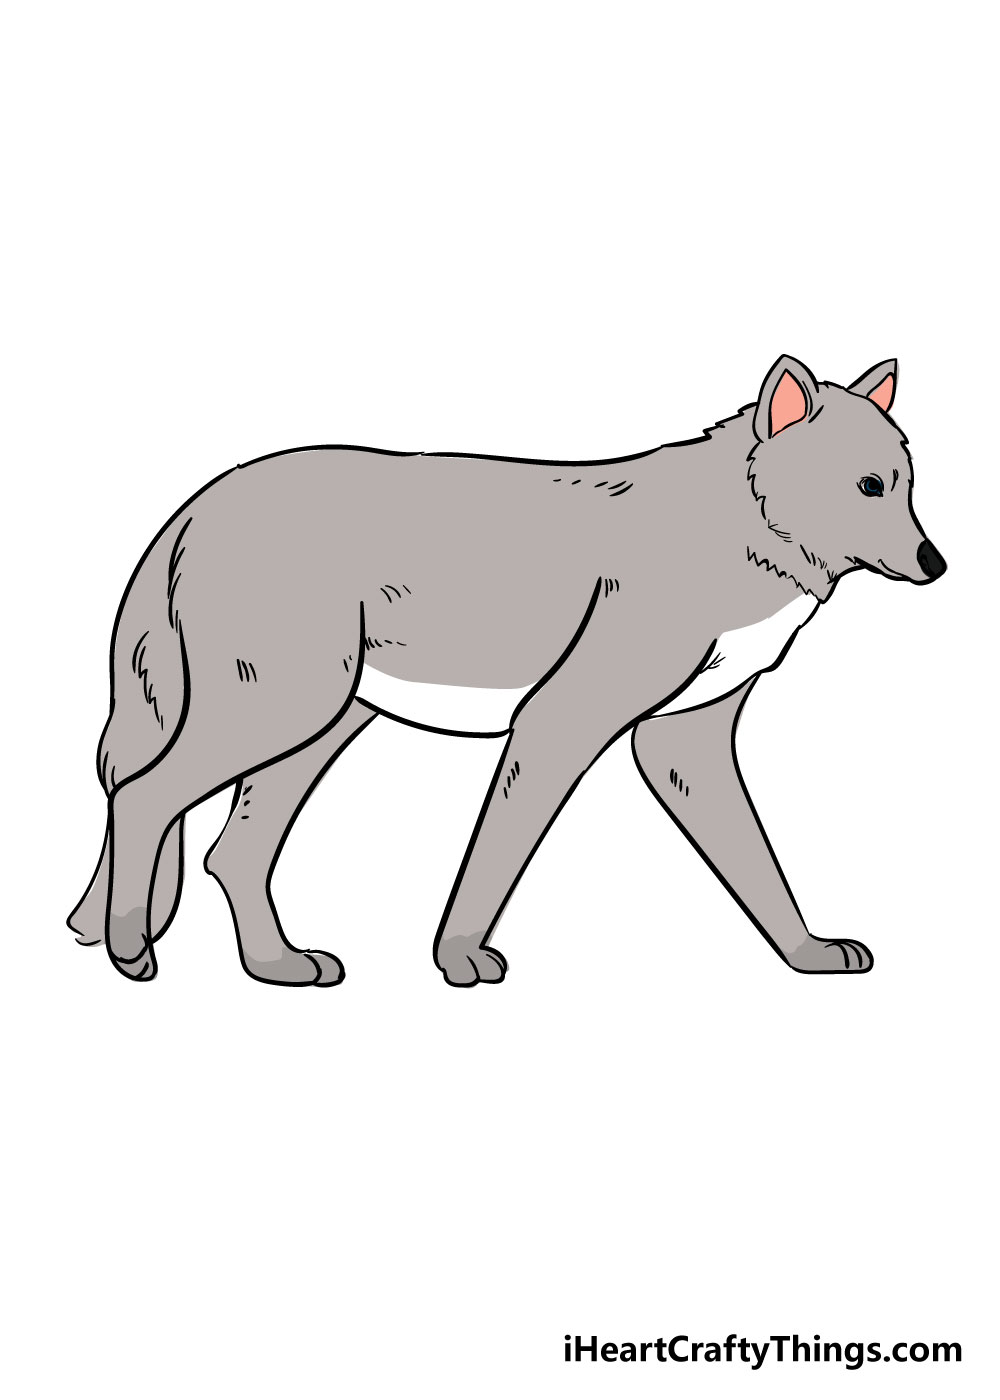 Wolf Drawing - How To Draw A Wolf Step By Step!